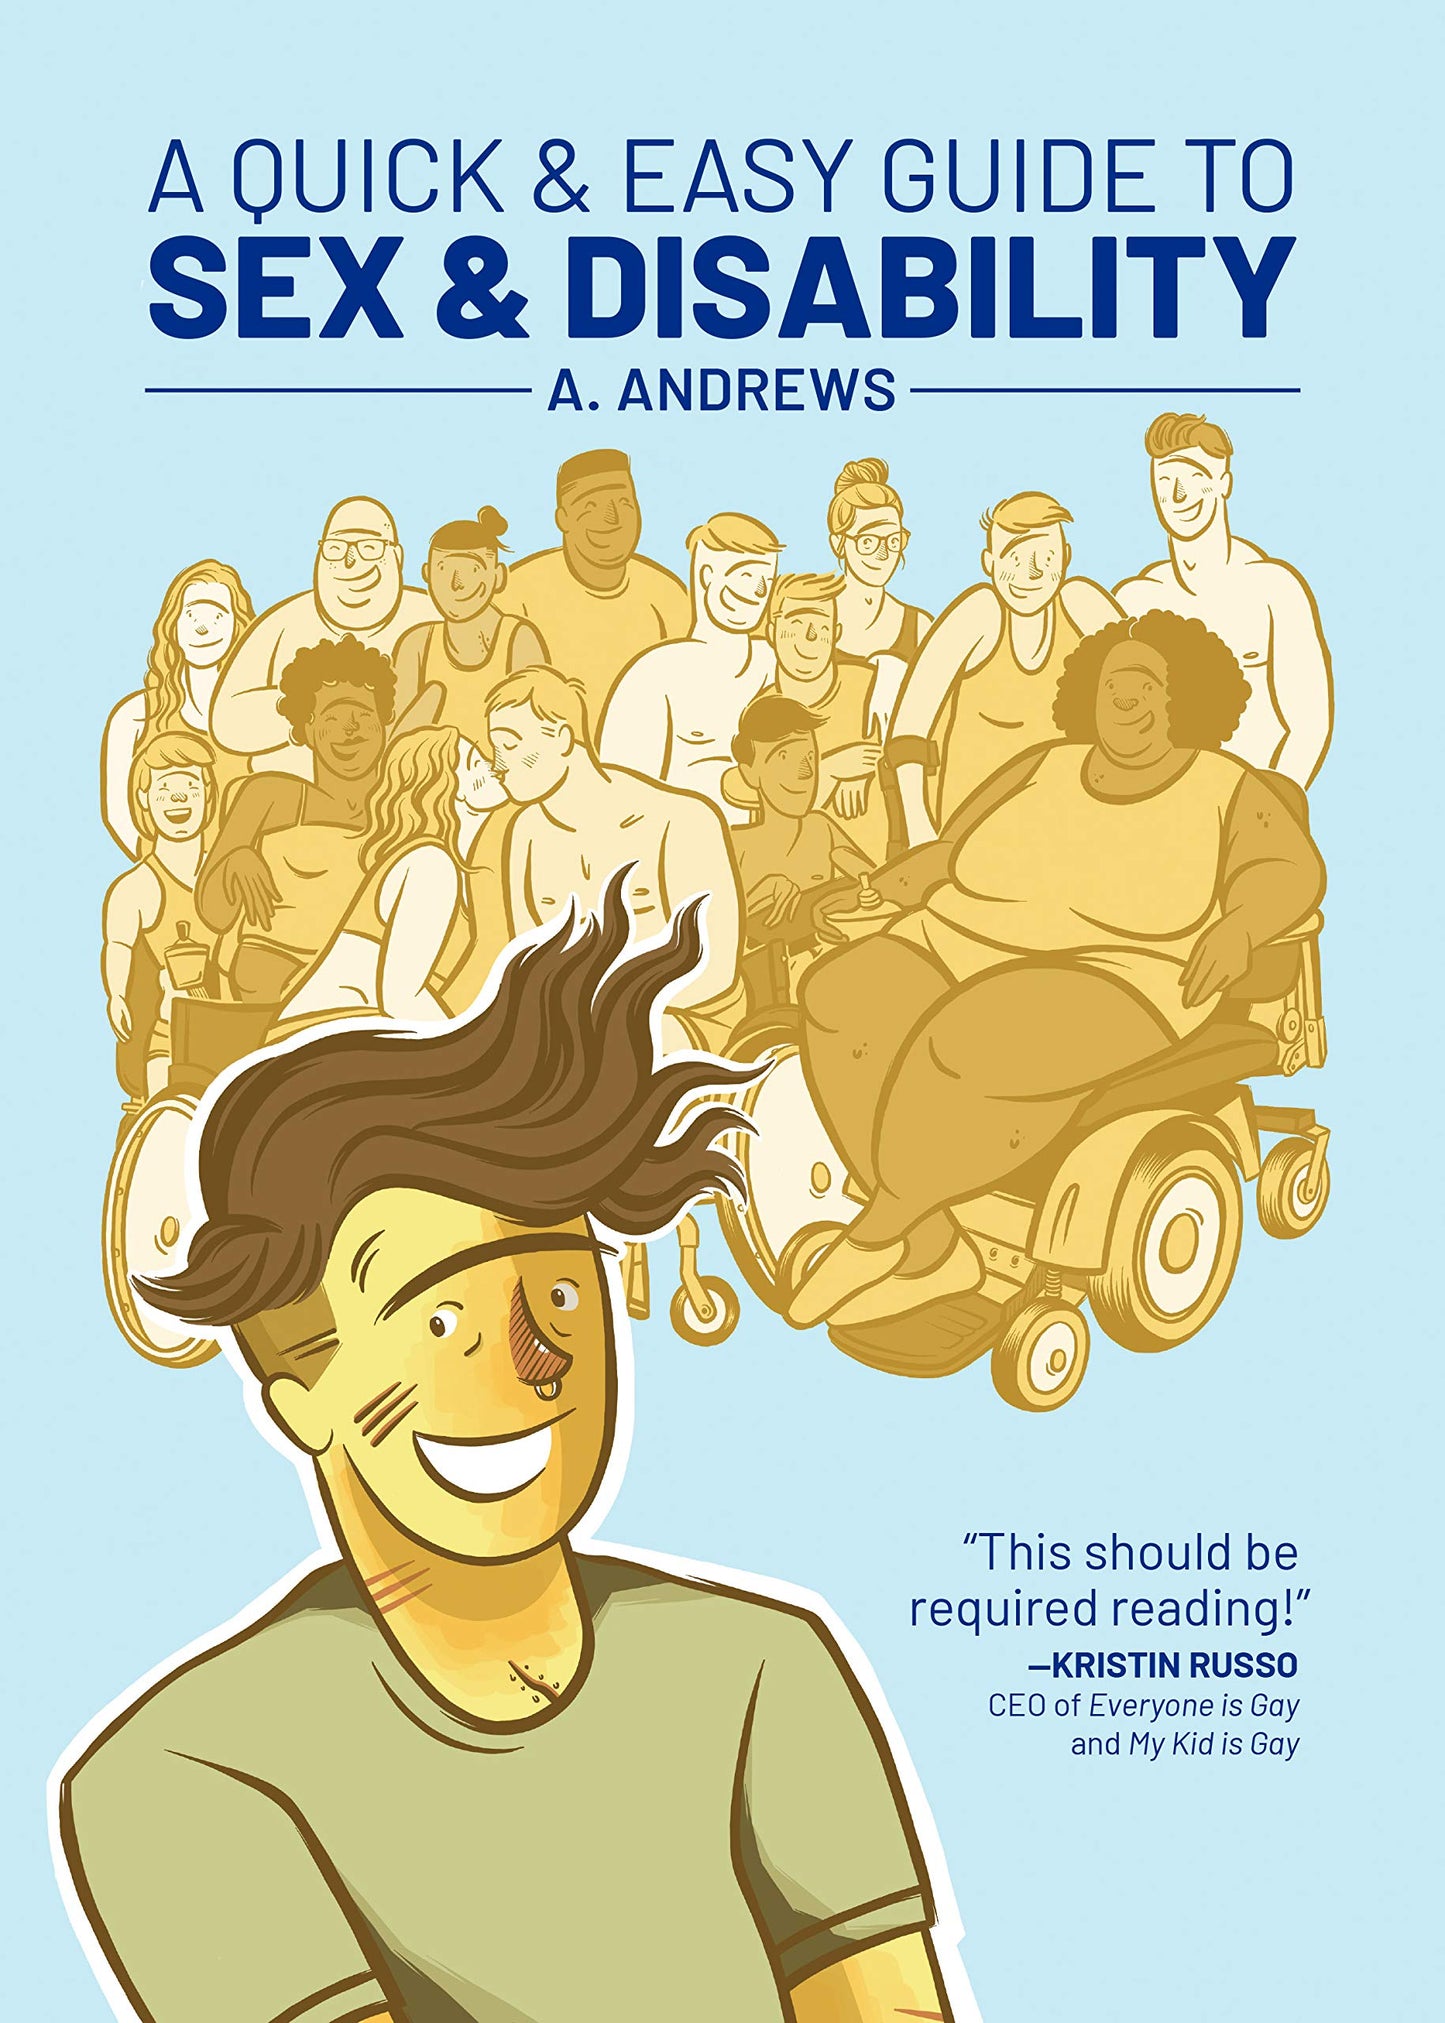 A Quick And Easy Guide To Sex And Disability by A. Andrews